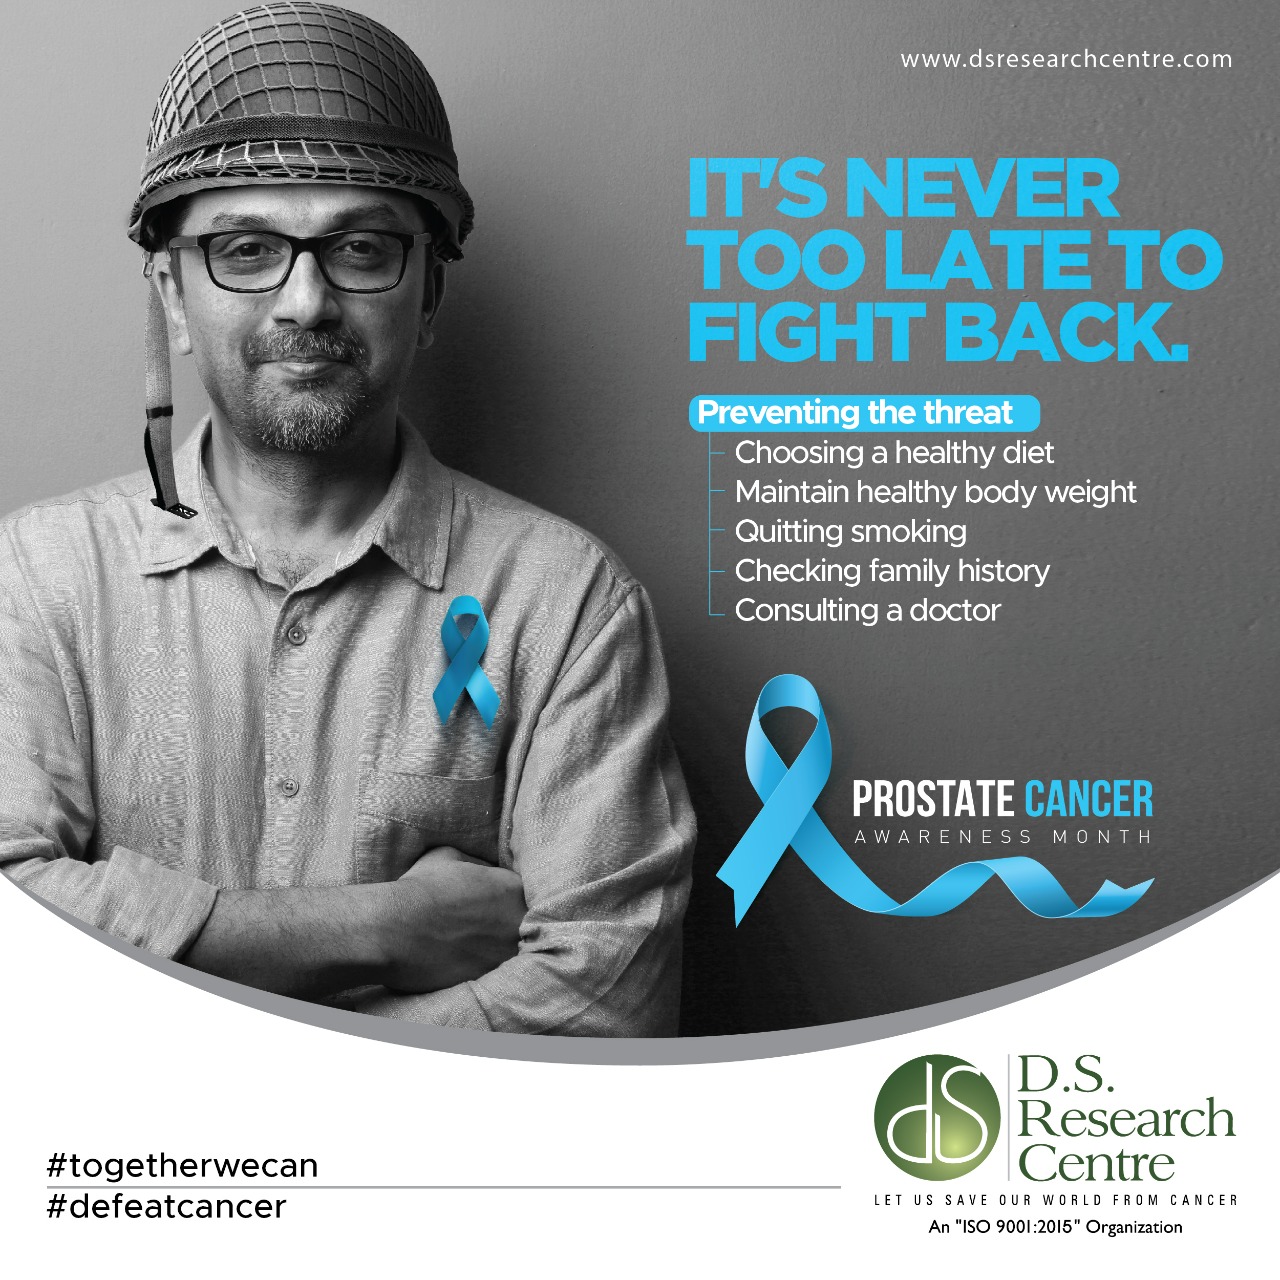 PROSTATE CANCER - It is Never Too Late to Fight Back